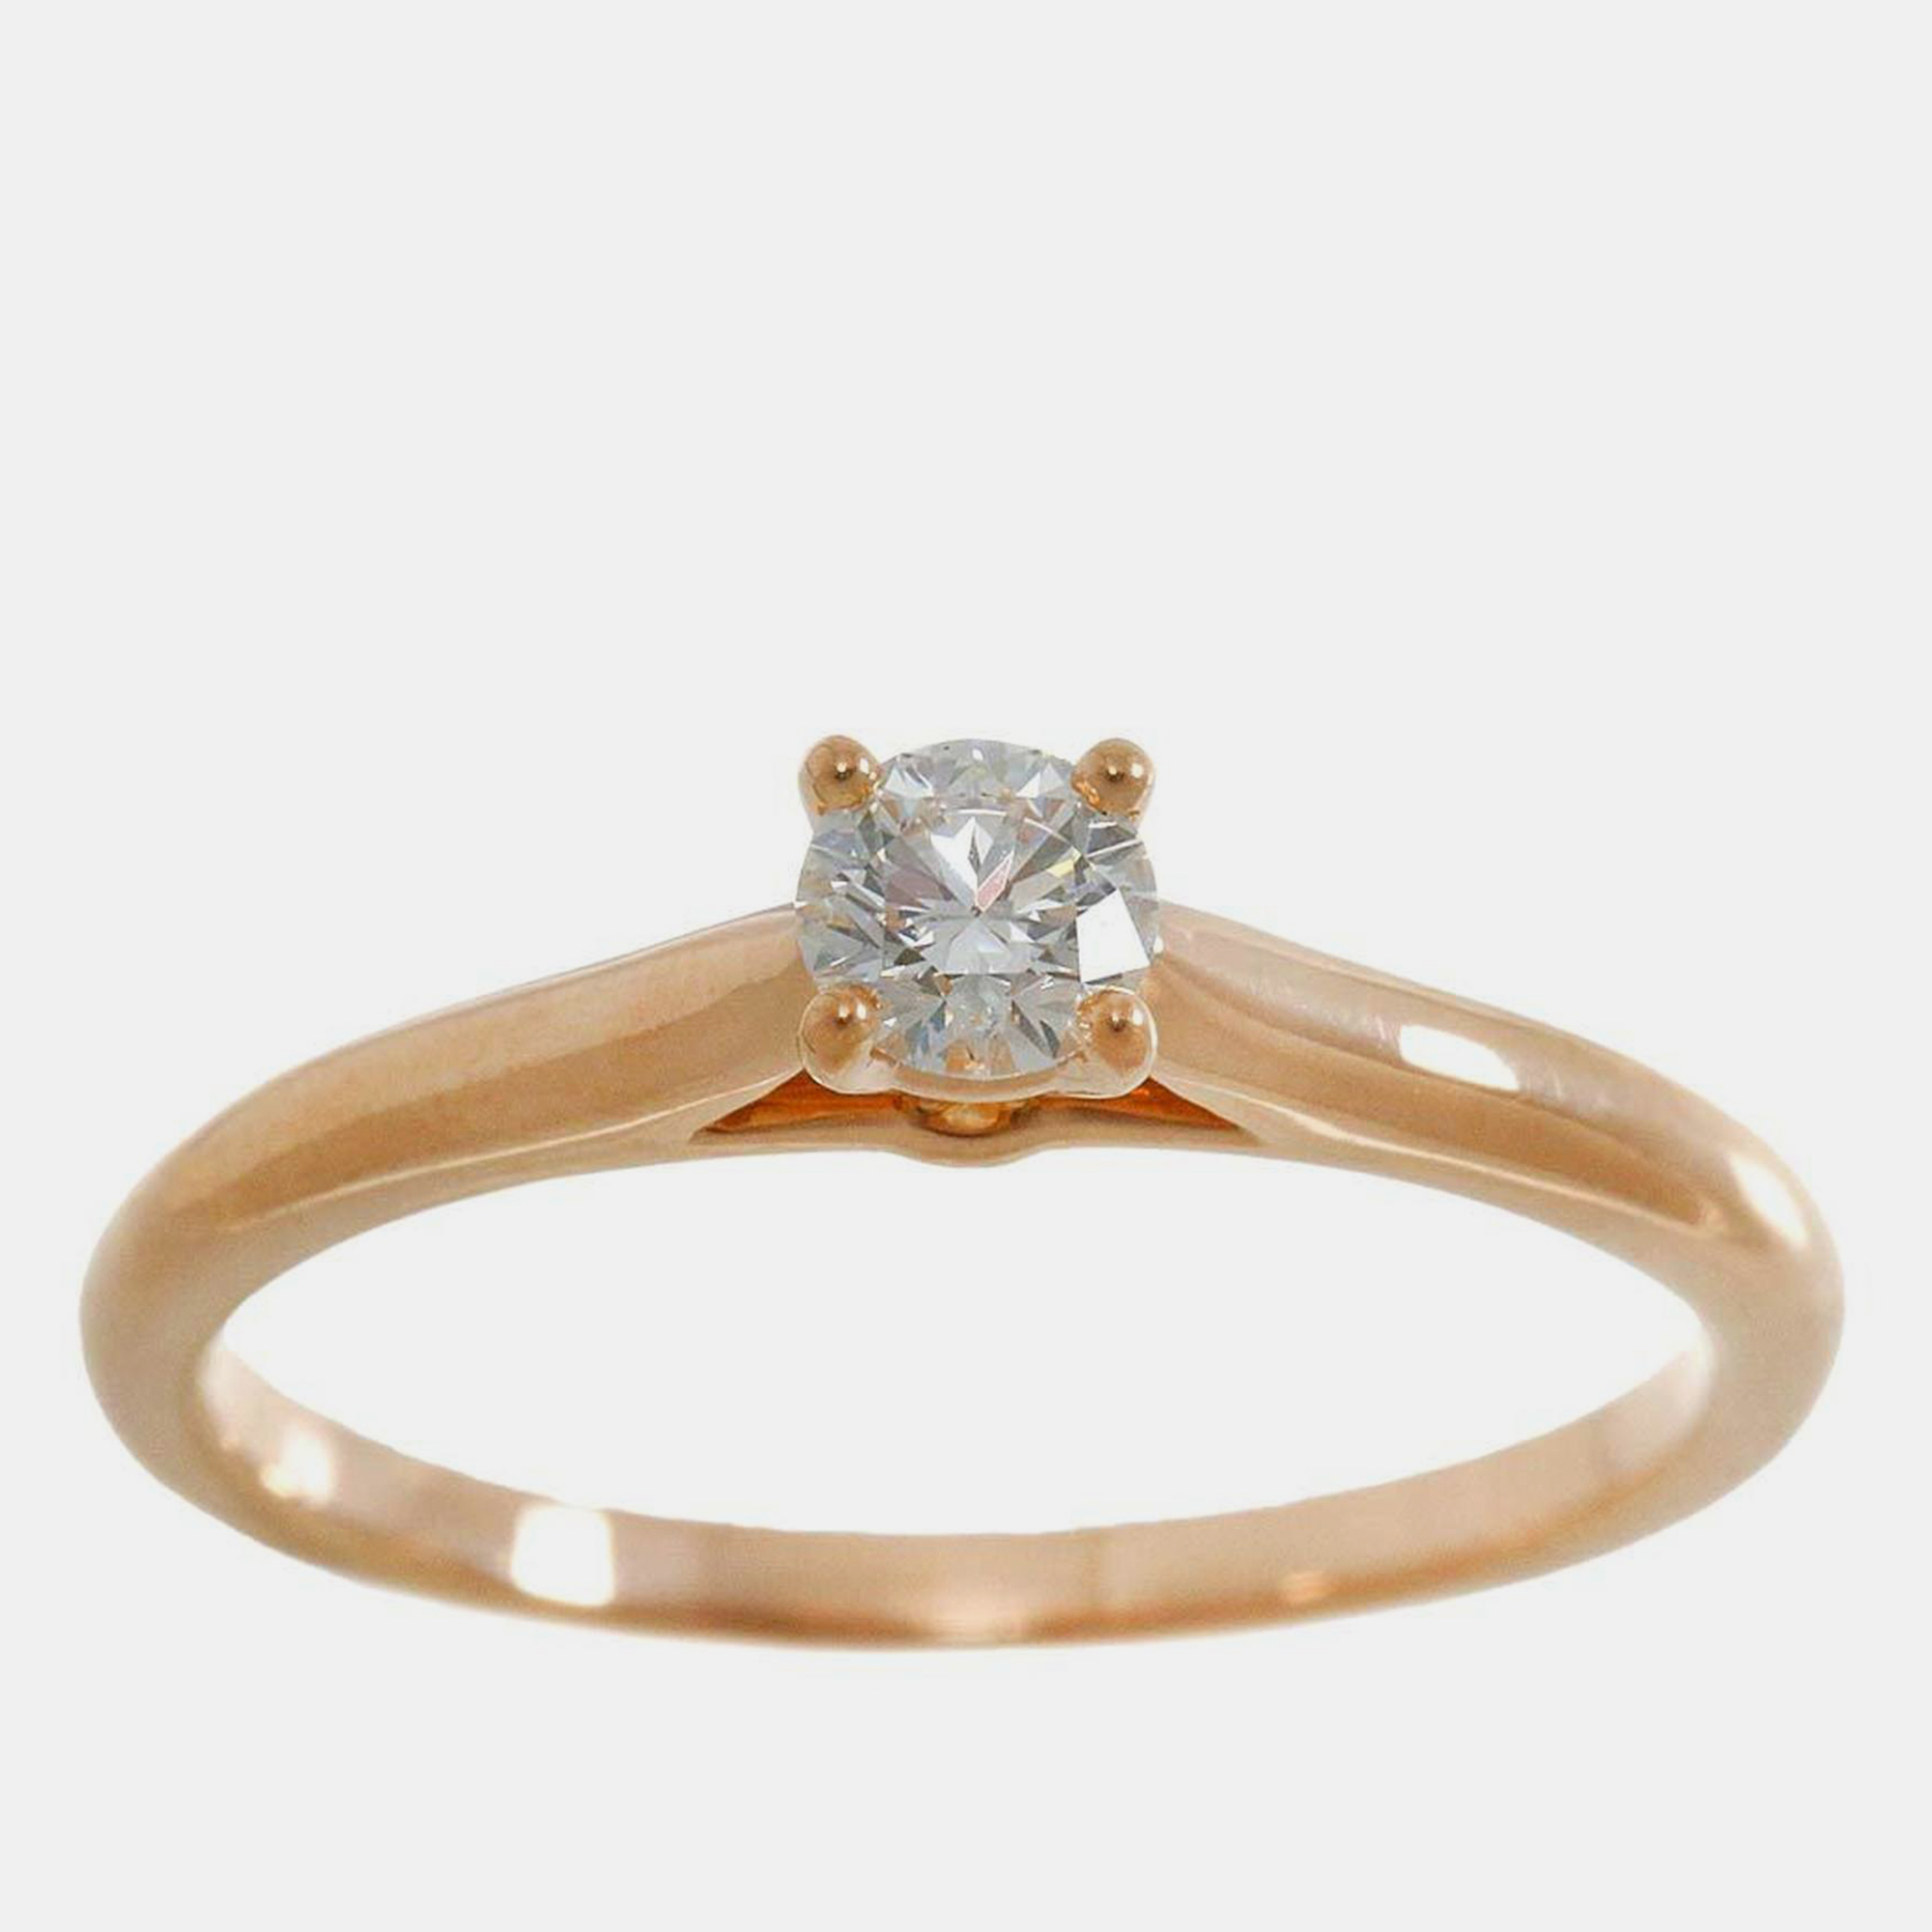 Cartier 18k rose gold and diamond 1895 solitaire ring eu 50